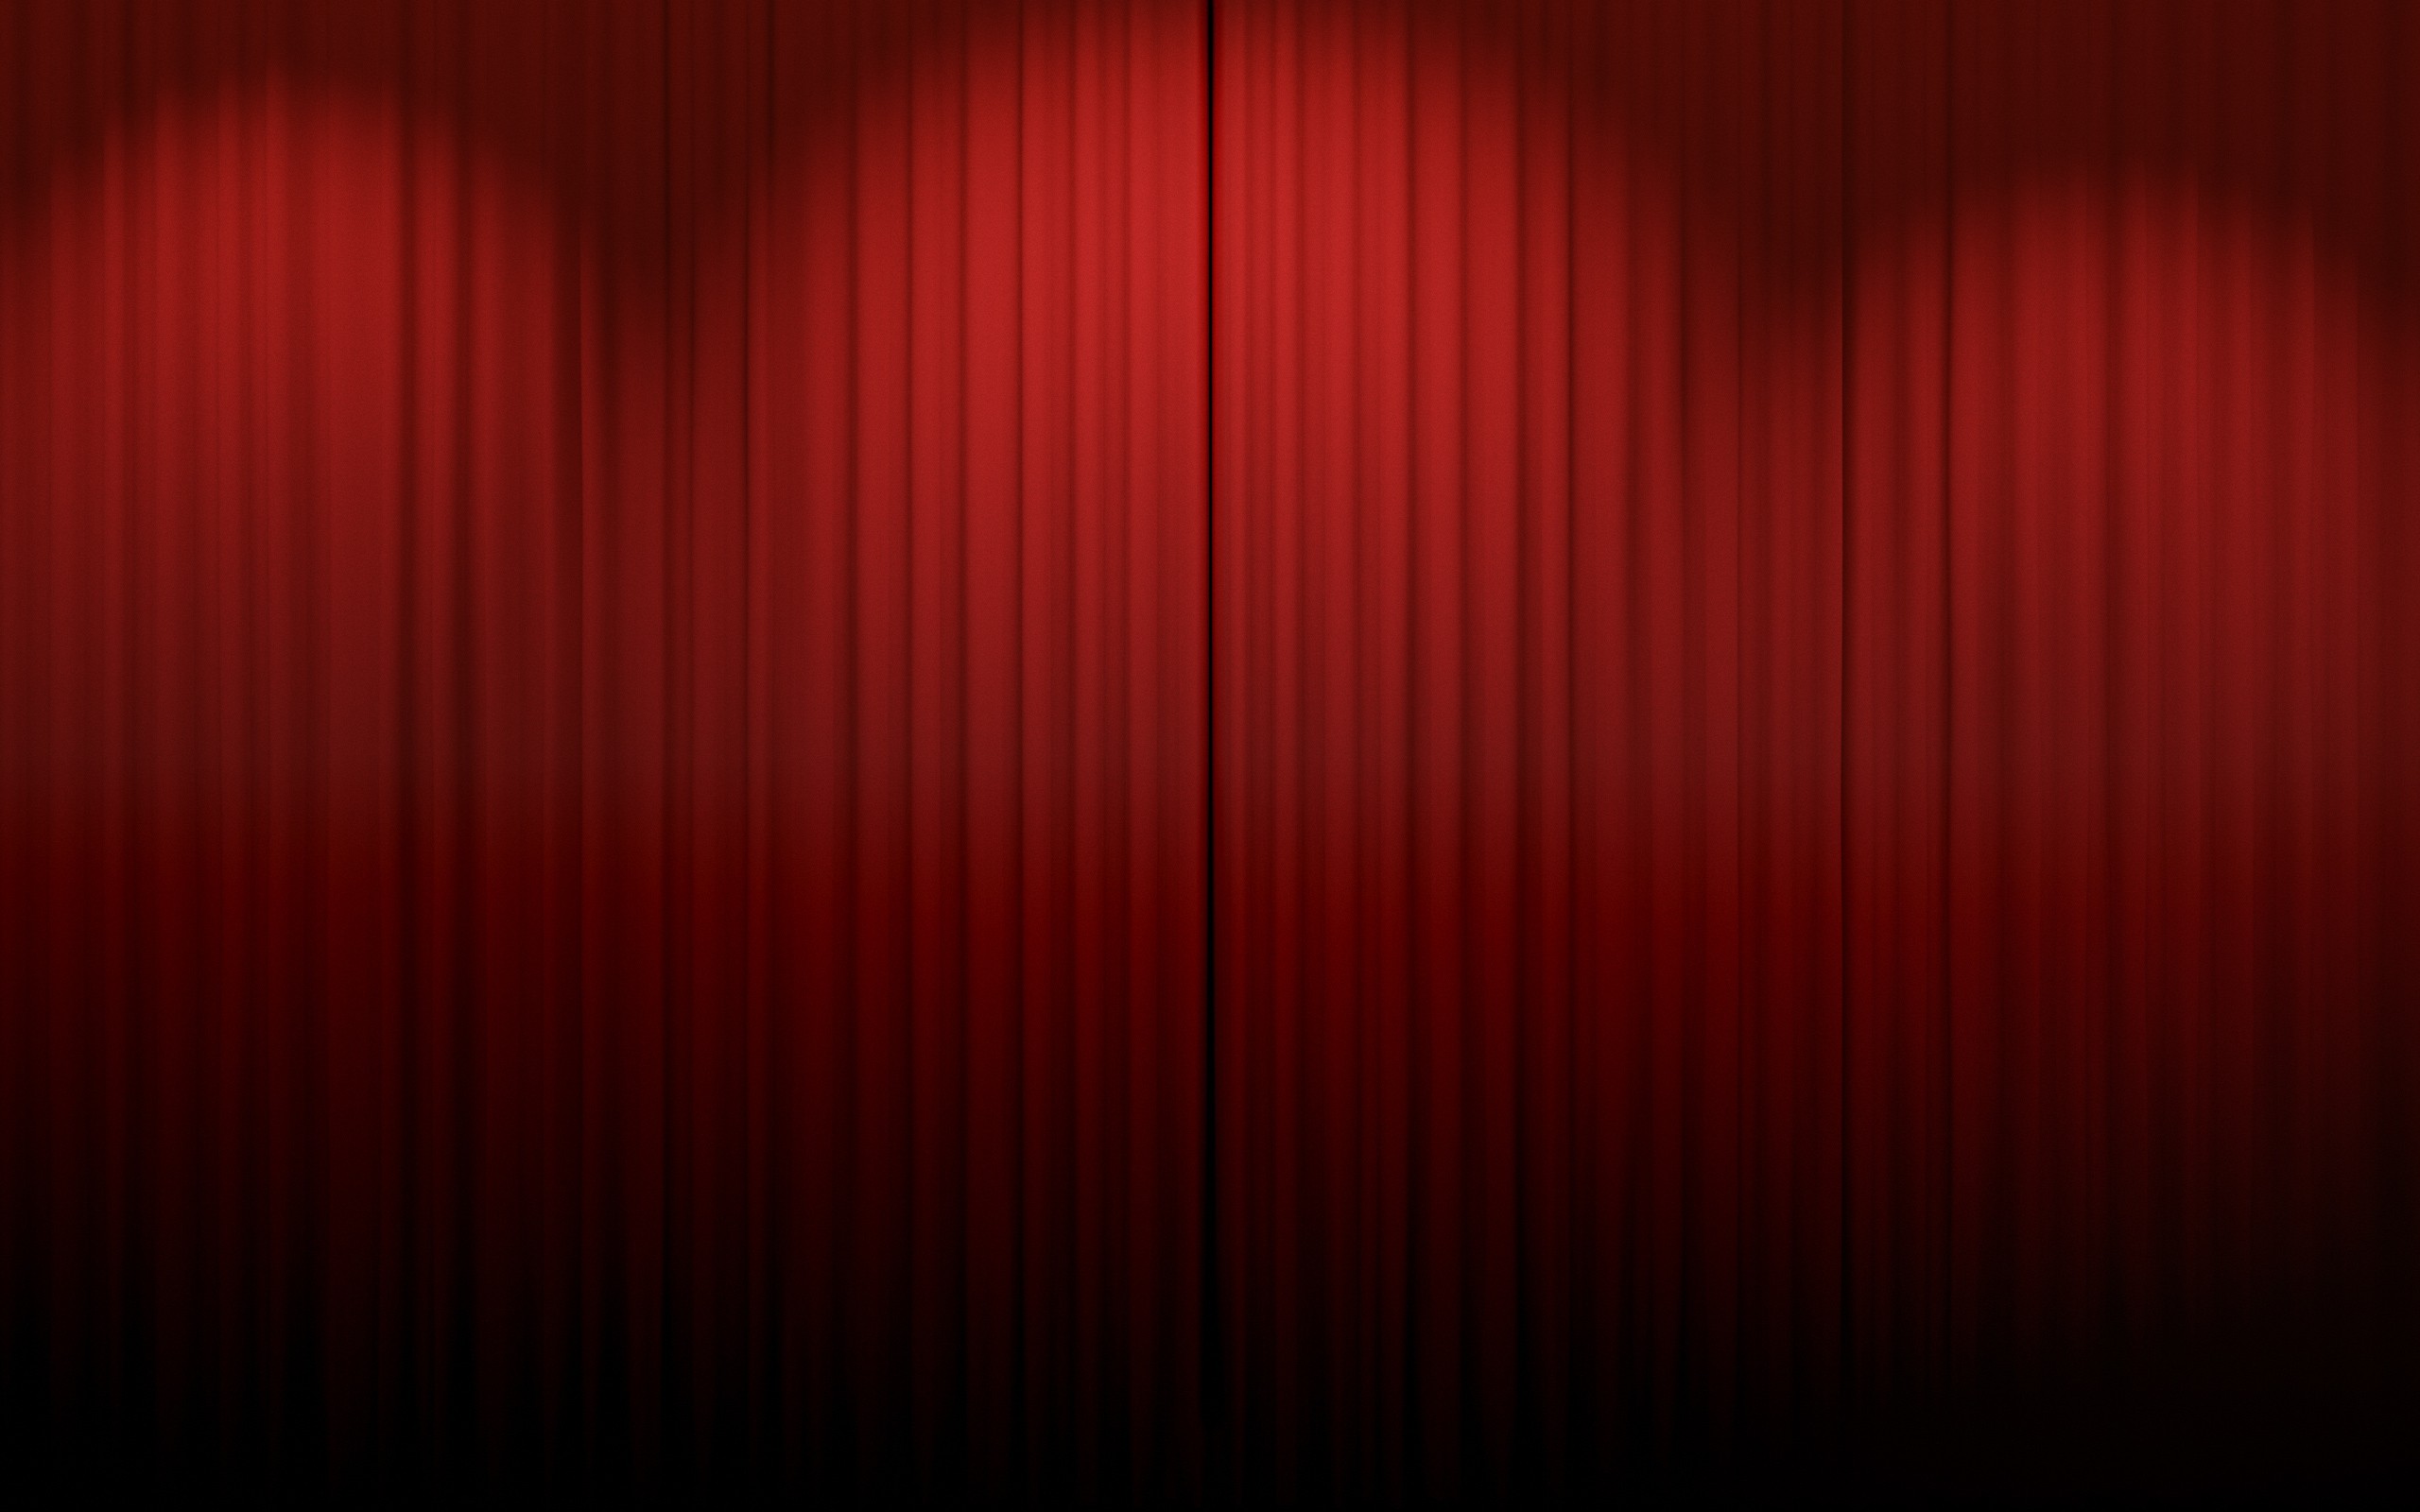 Altoos Doende » random-wallpapers-red-curtain-background-wallpaper 